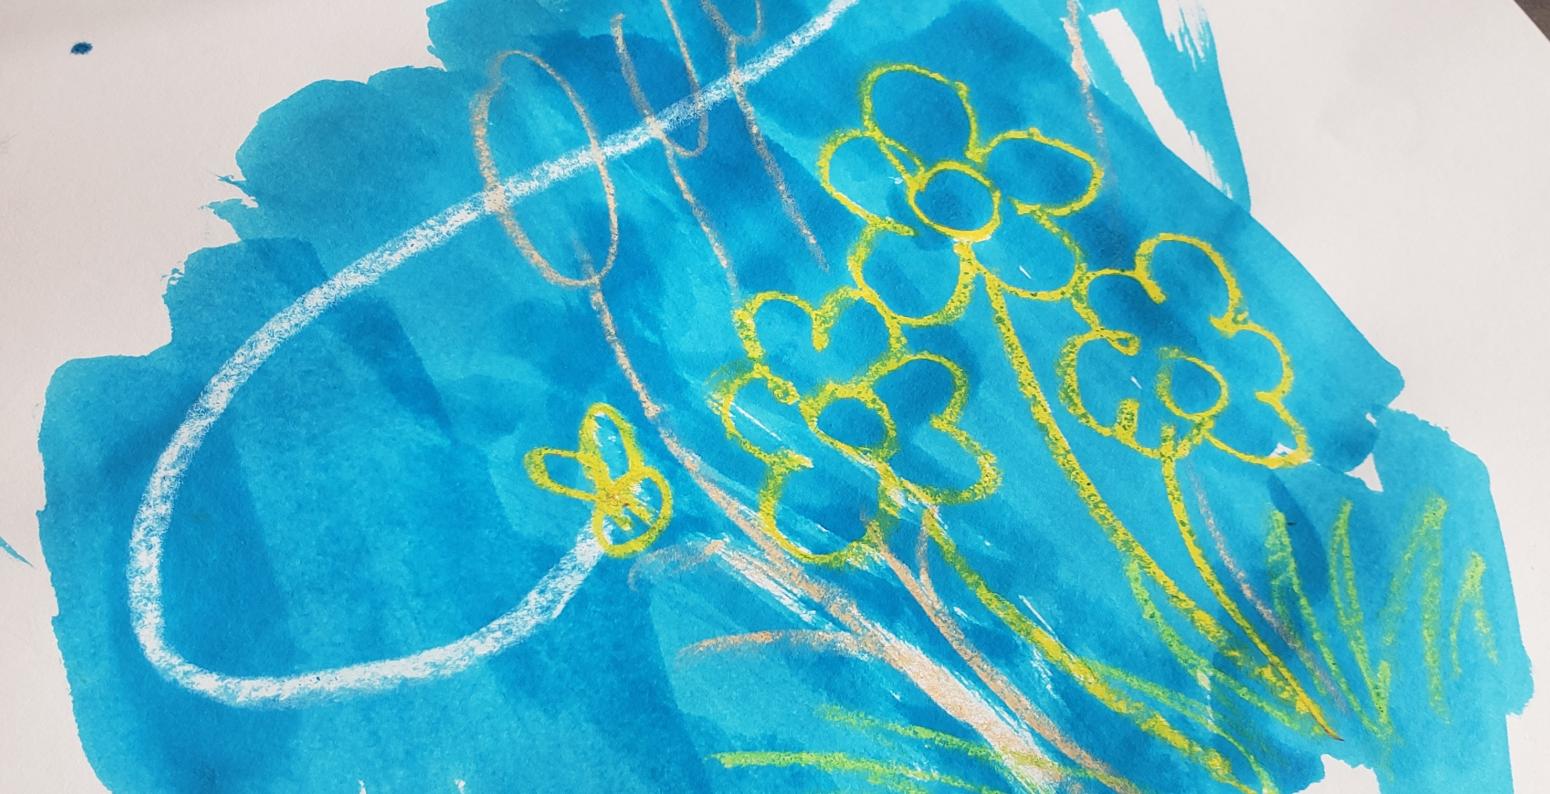 A watercolor resist drawing of white and yellow flowers with a blue background.